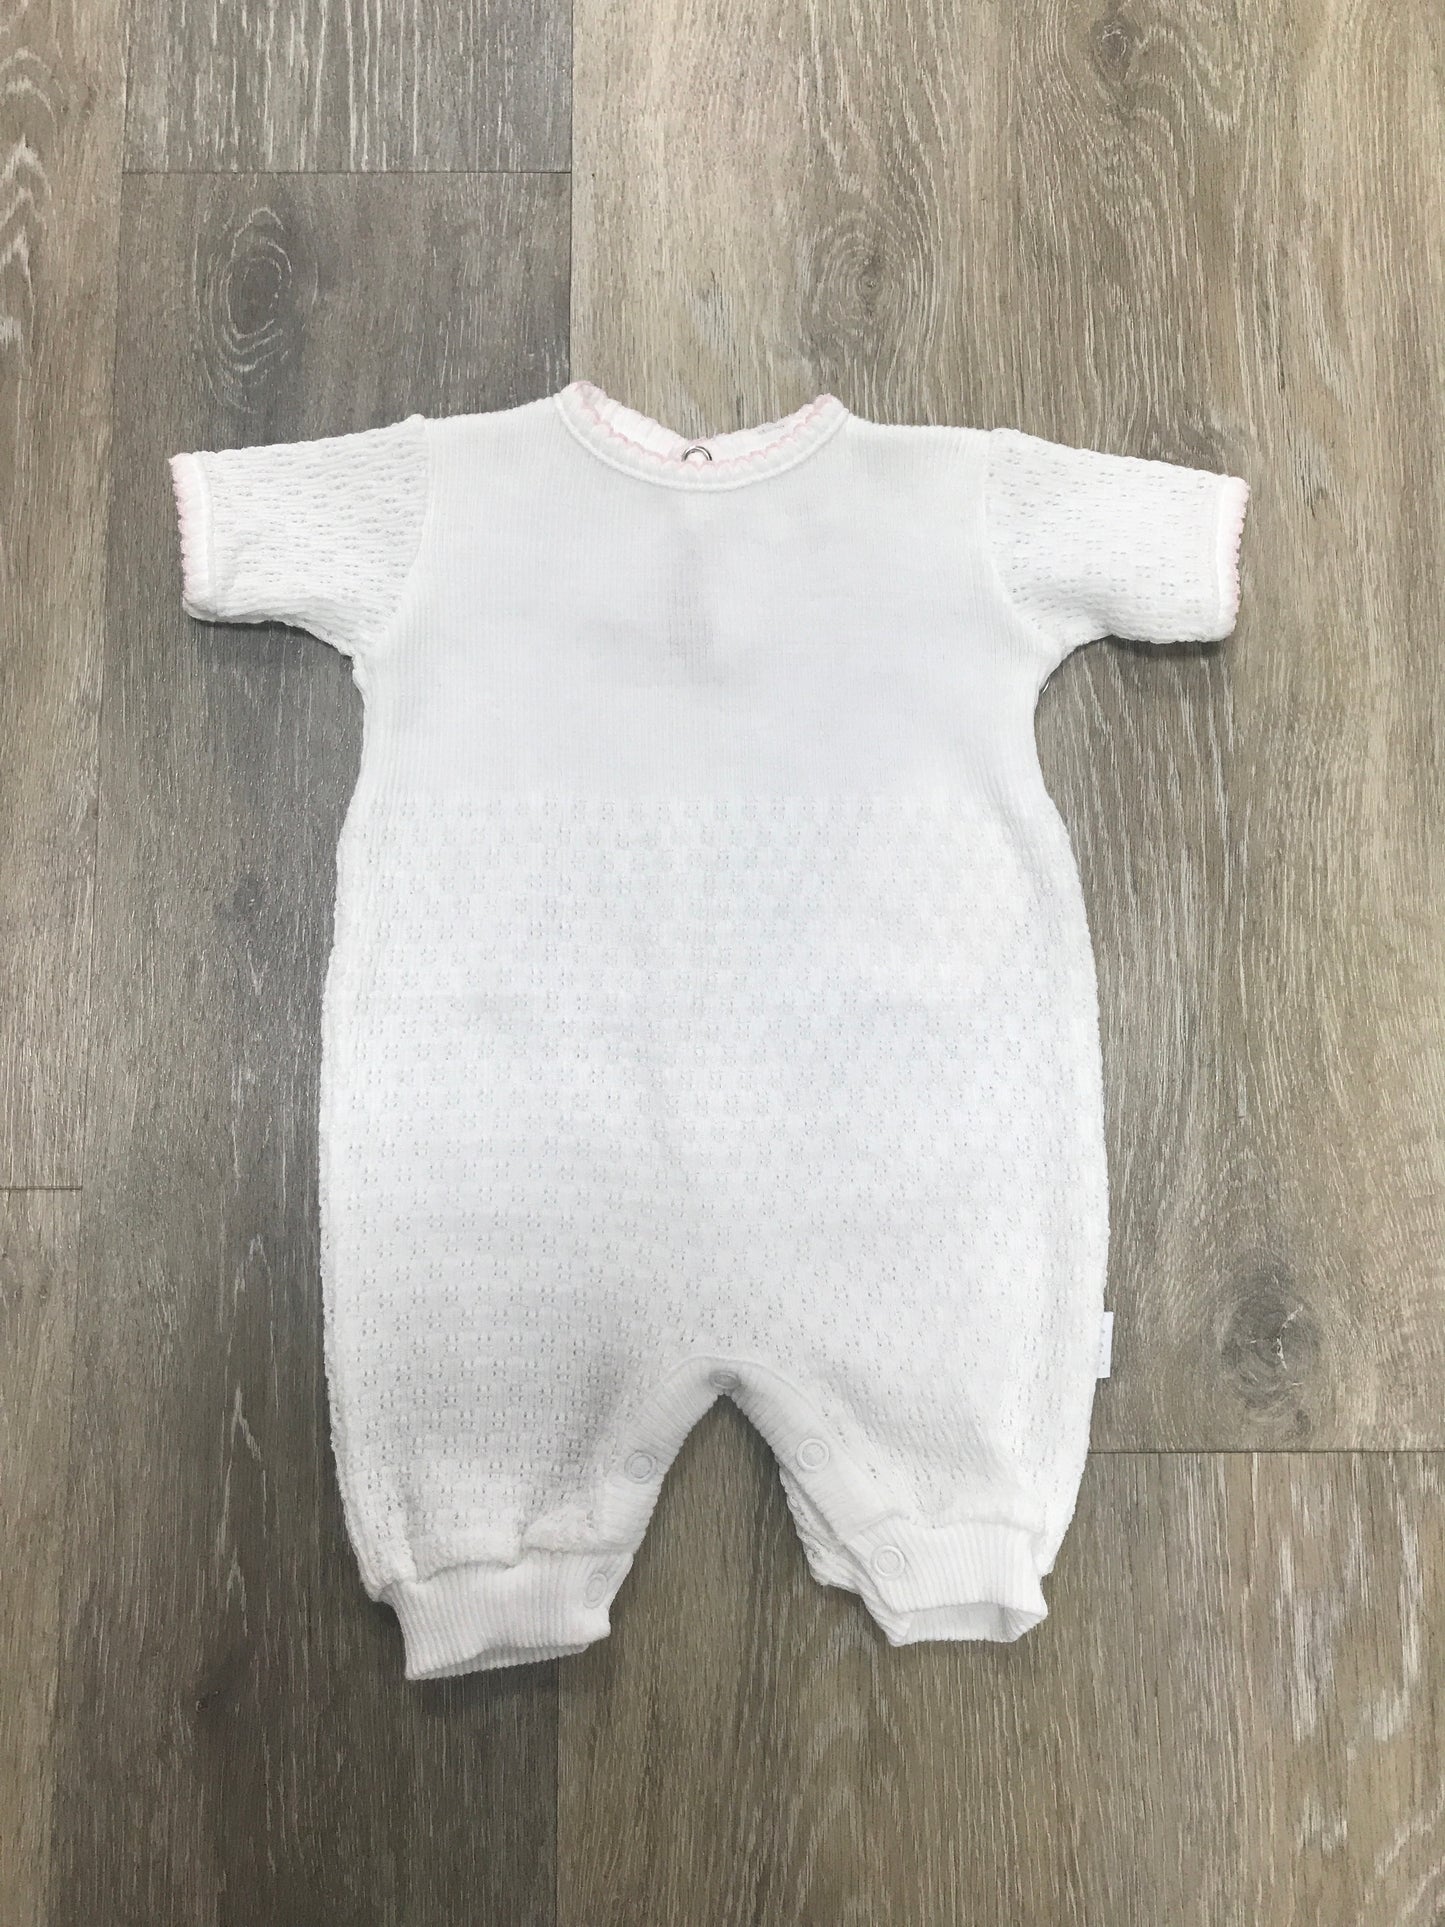 White Short Sleeve Romper with Pink Trim Preemie - Doodlebug's Children's Boutique